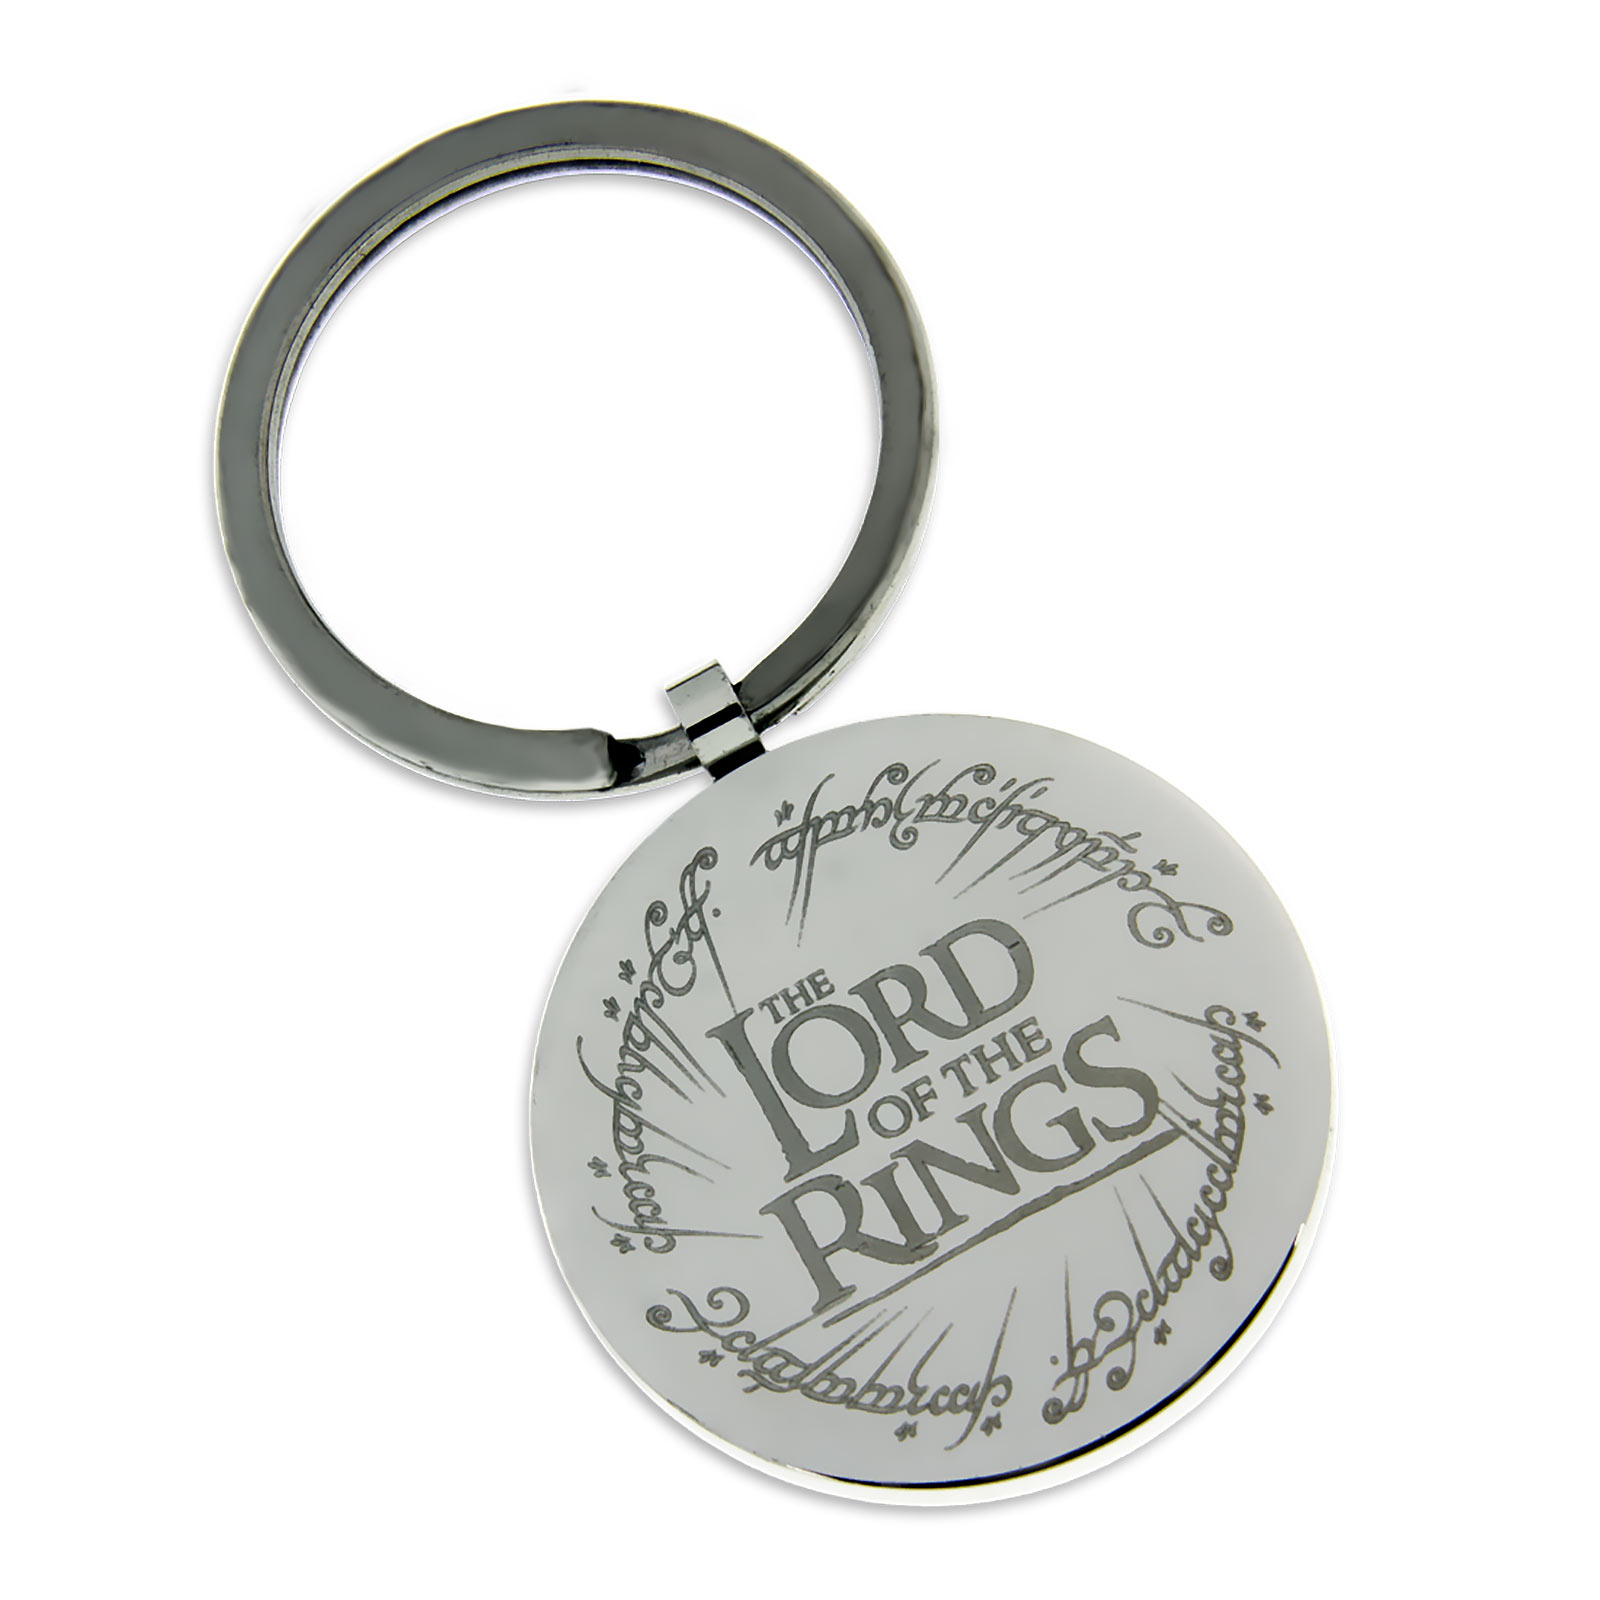 Lord of the Rings - The One Ring Keychain